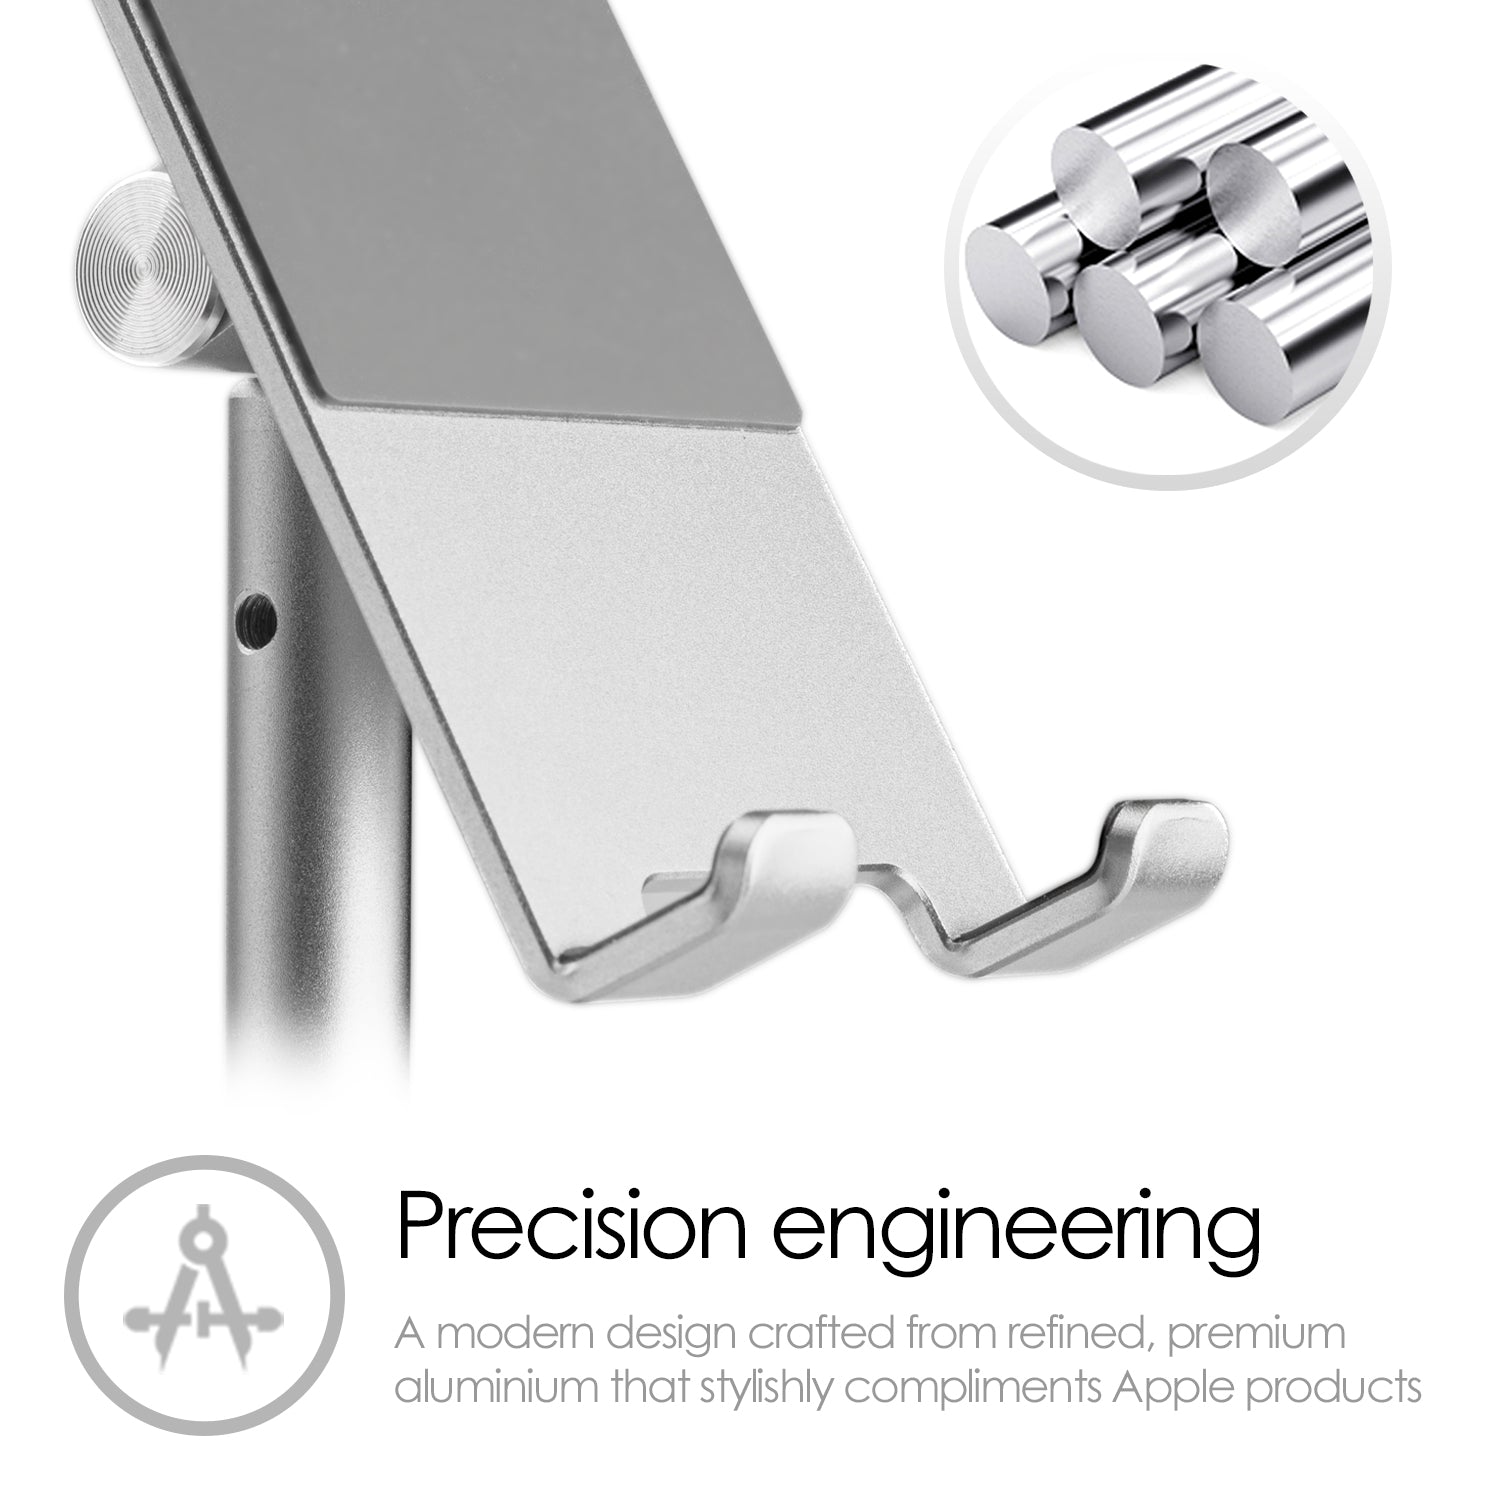 Image shows the precision engineering of an aluminium metal phone or tablet stand, a small cutaway shows  raw aluminium rods .  Text reads "precision engineering"